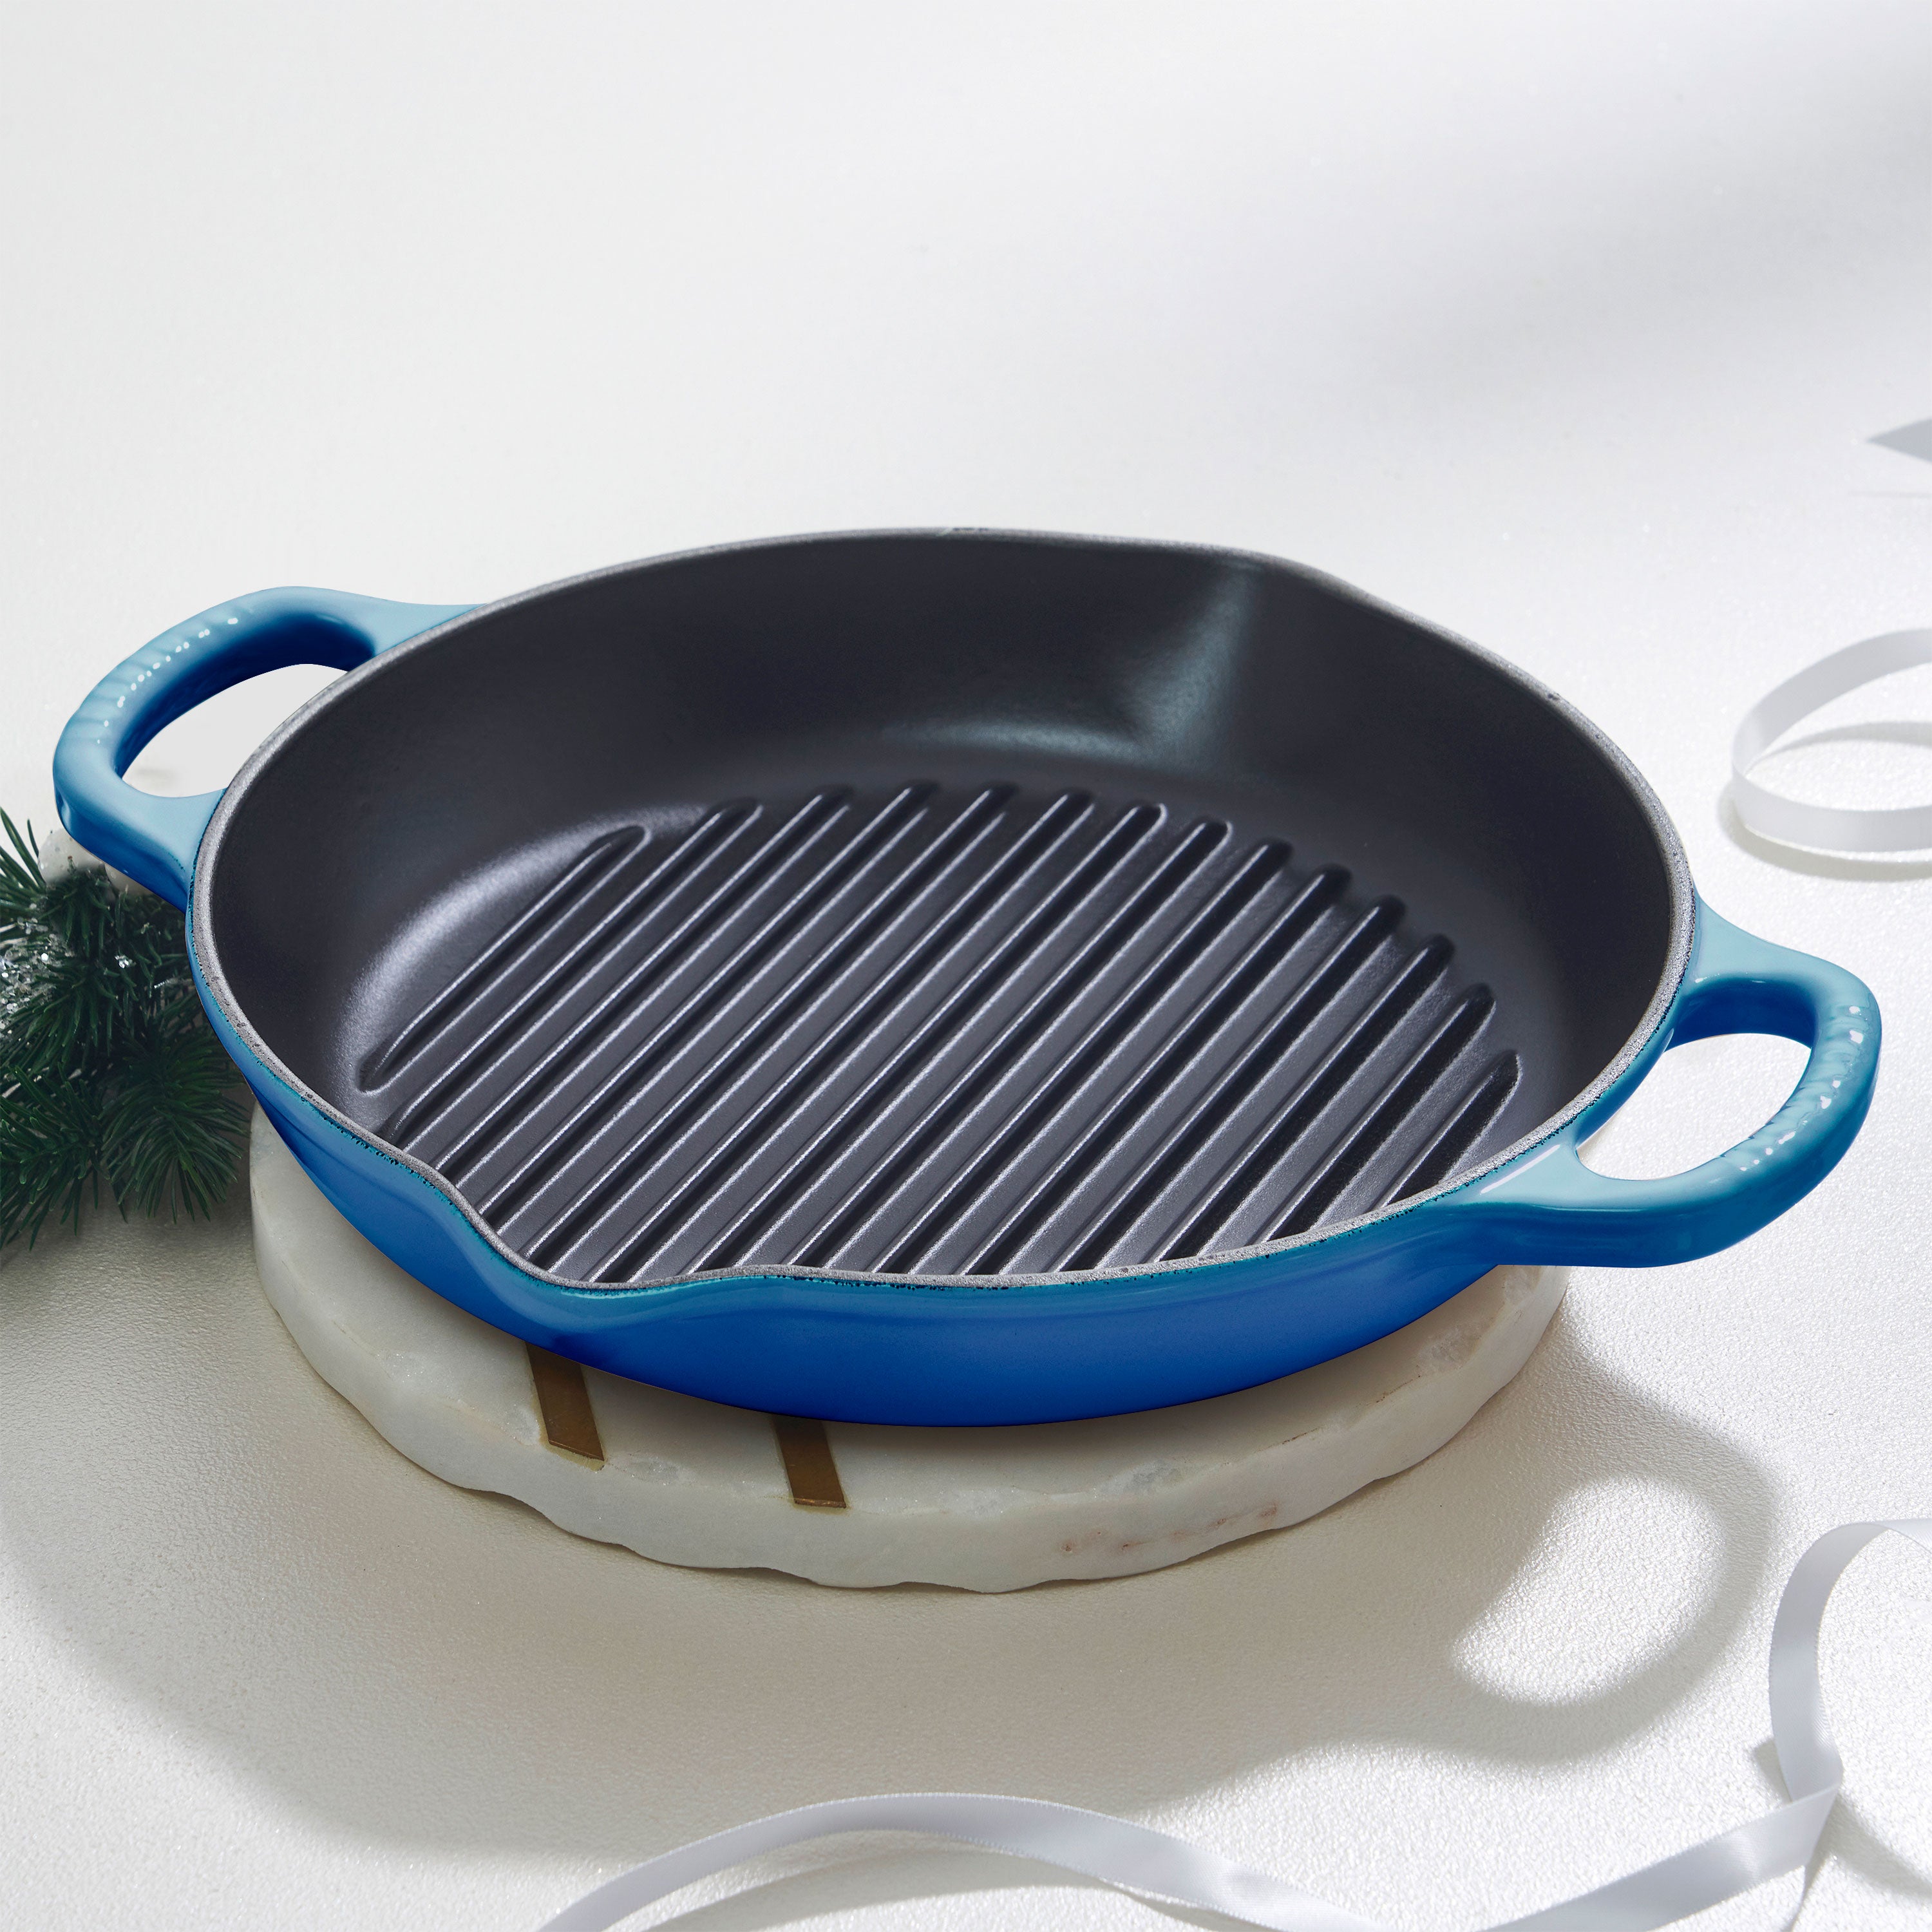 Le Creuset - 25cm Blueberry Deep Round Grill Display